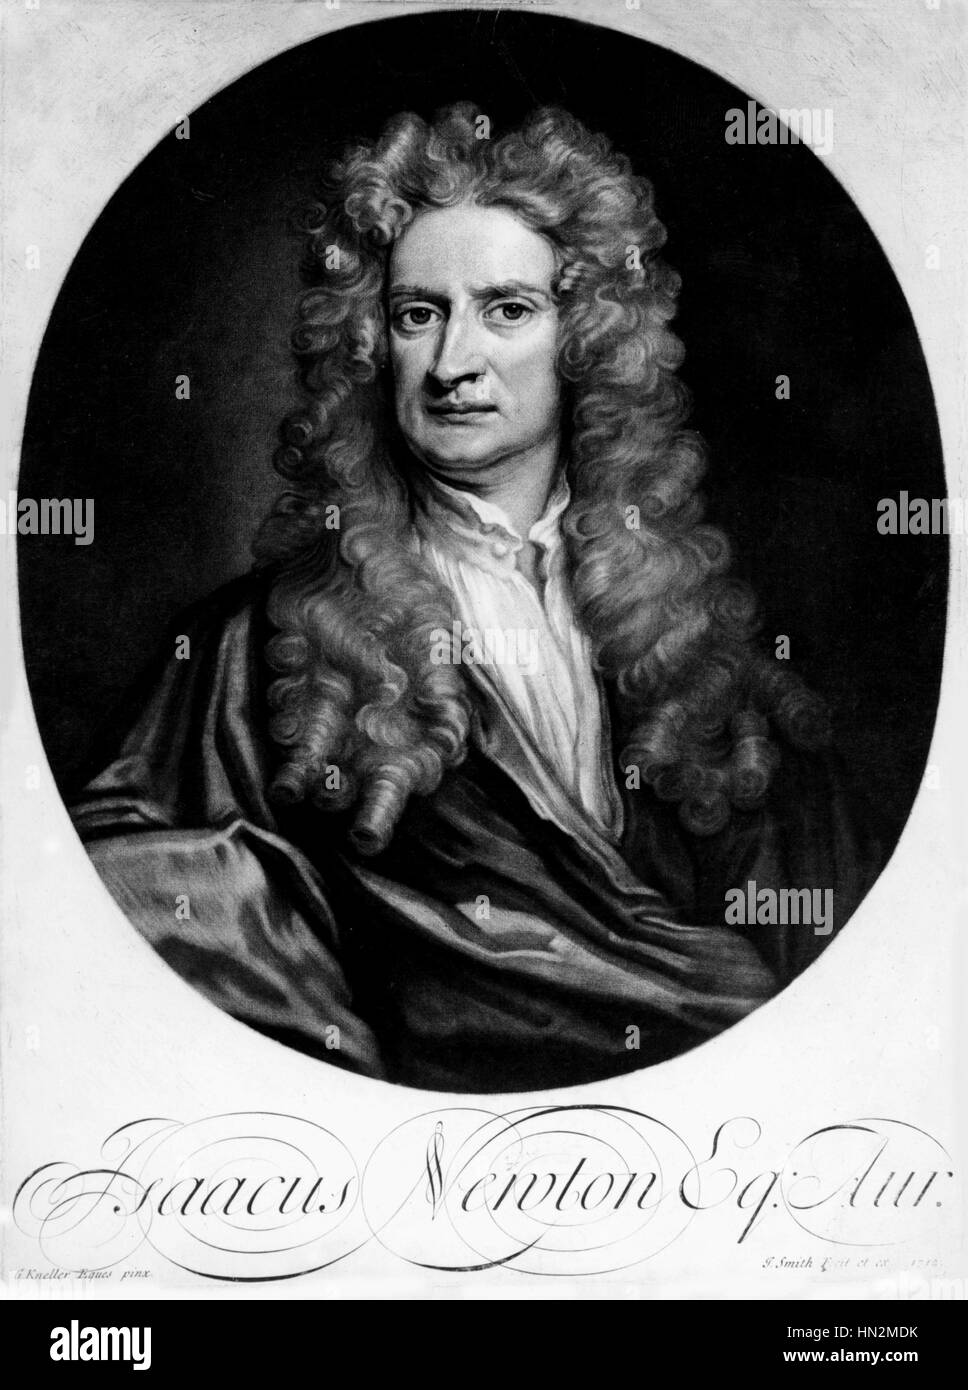 Isaac Newton by G. Kneller 17th century Londres-National Portrait Gallery Stock Photo